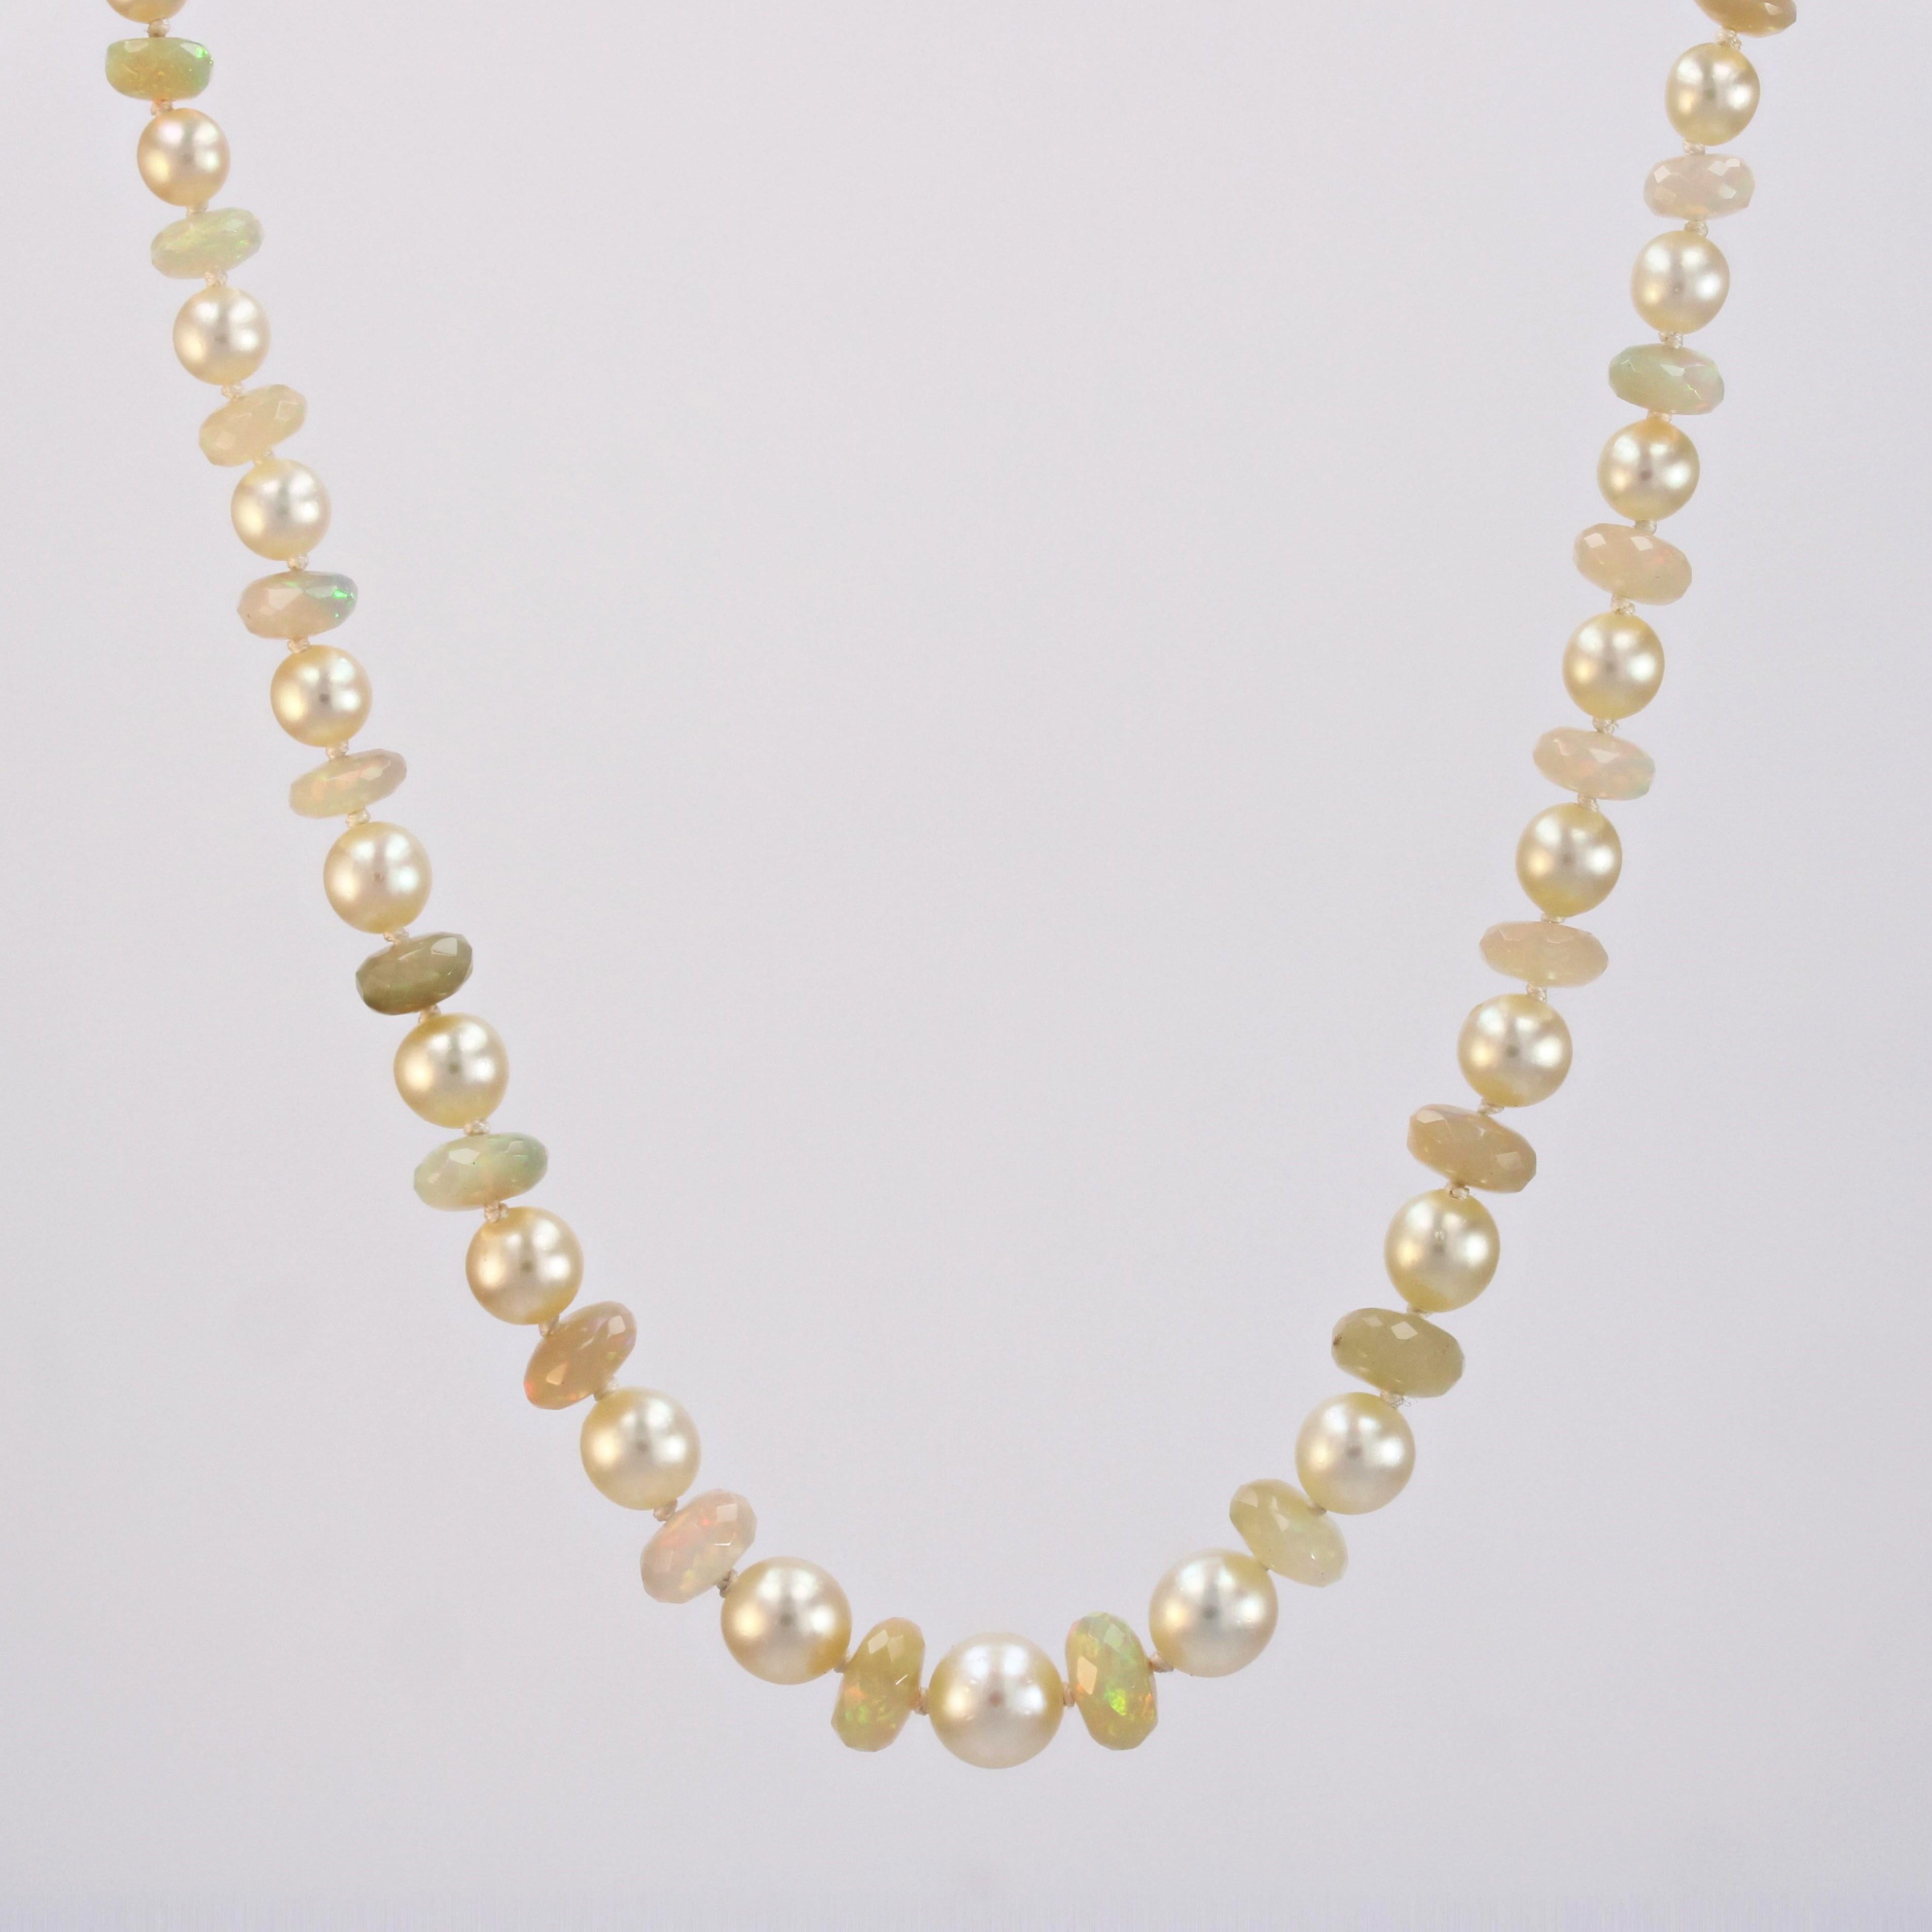 Modern Cultured Pearls Opals 18 Karat White Gold Clasp Necklace For Sale 7